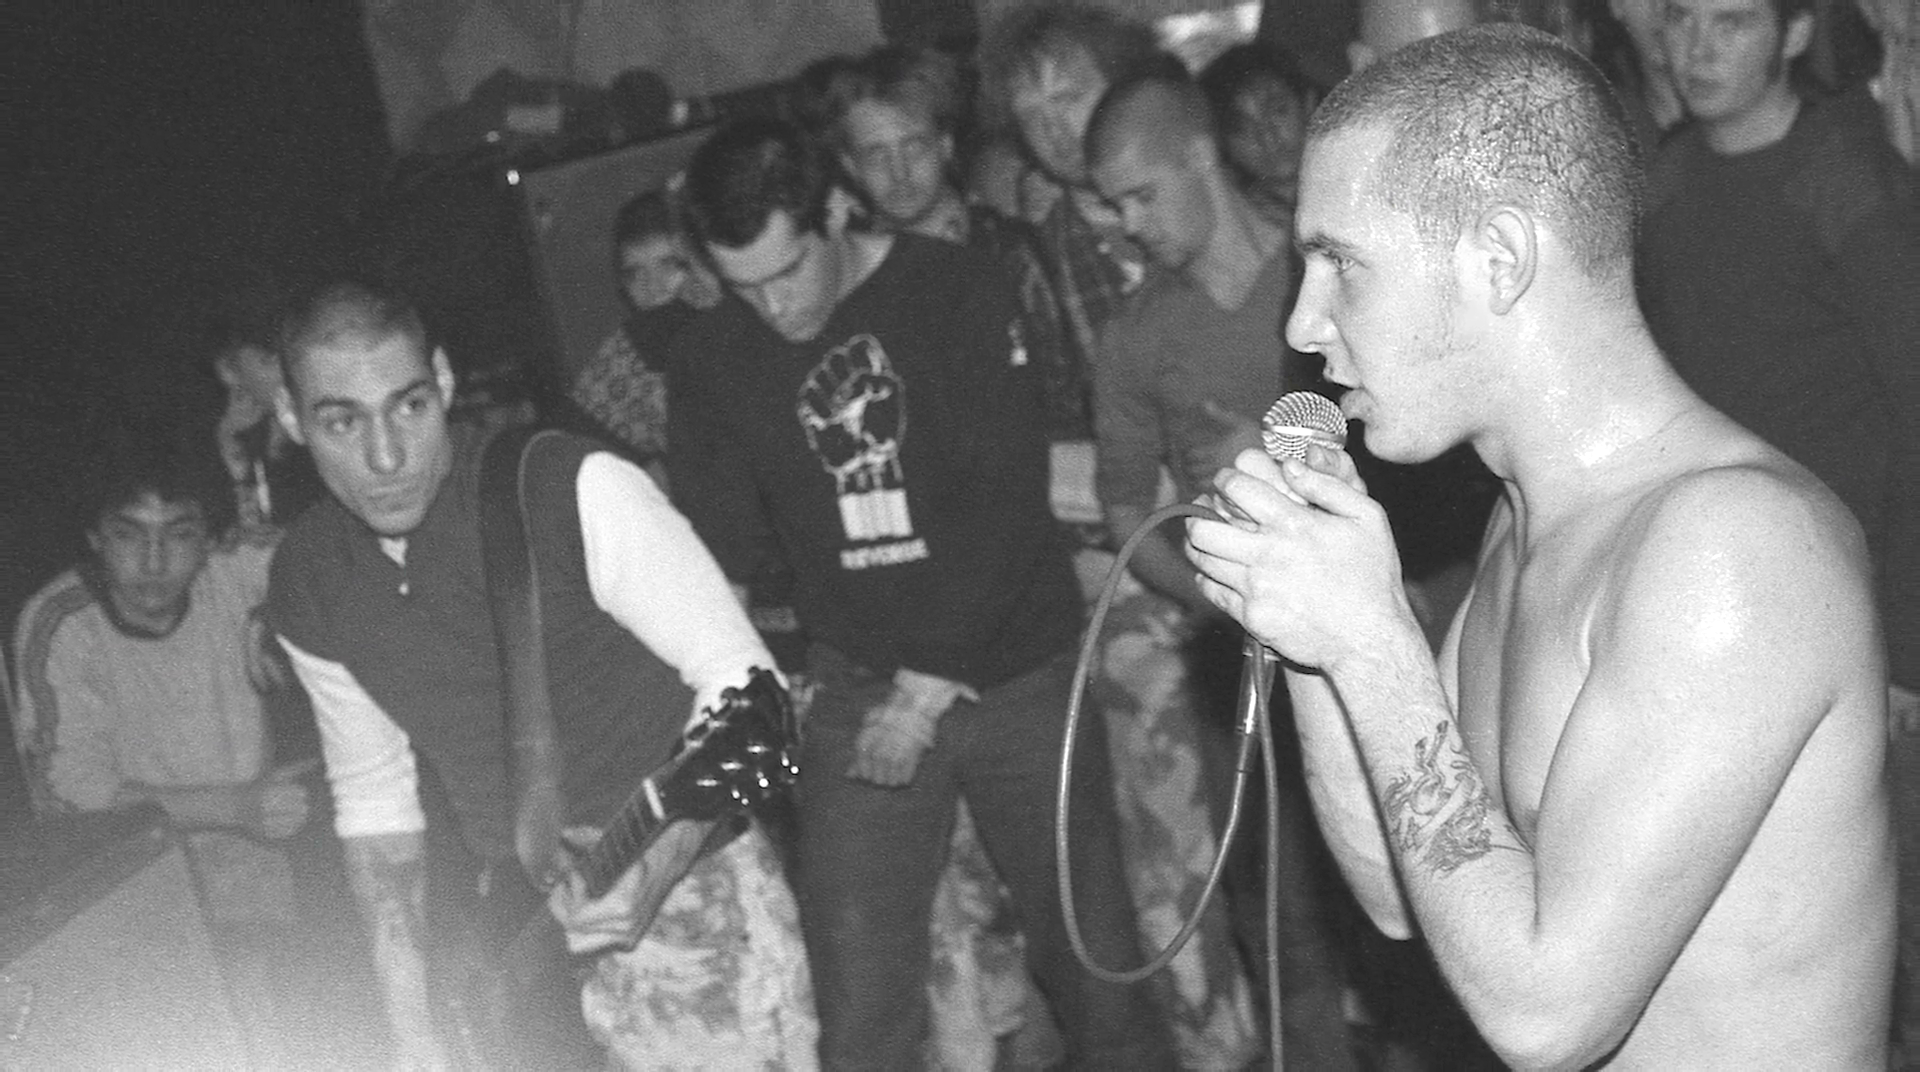 The Godfathers of Hardcore: Agnostic Front